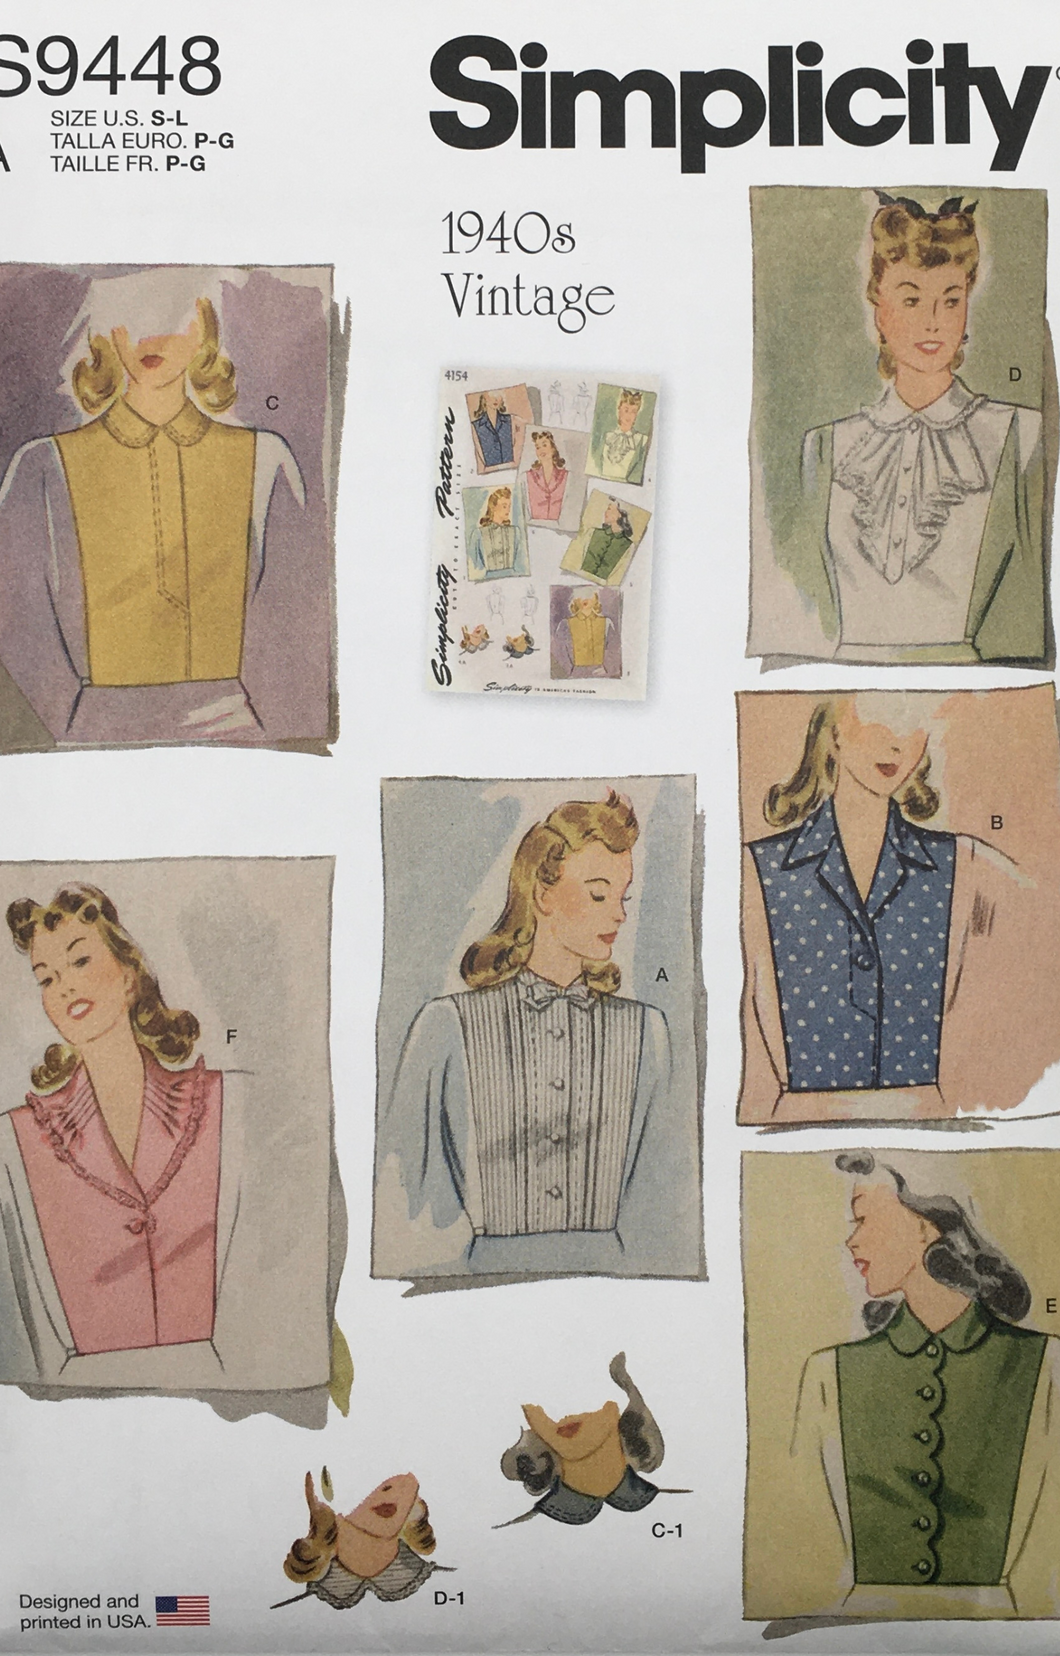 1940’s Reproduction Sewing Pattern: Simplicity S9448